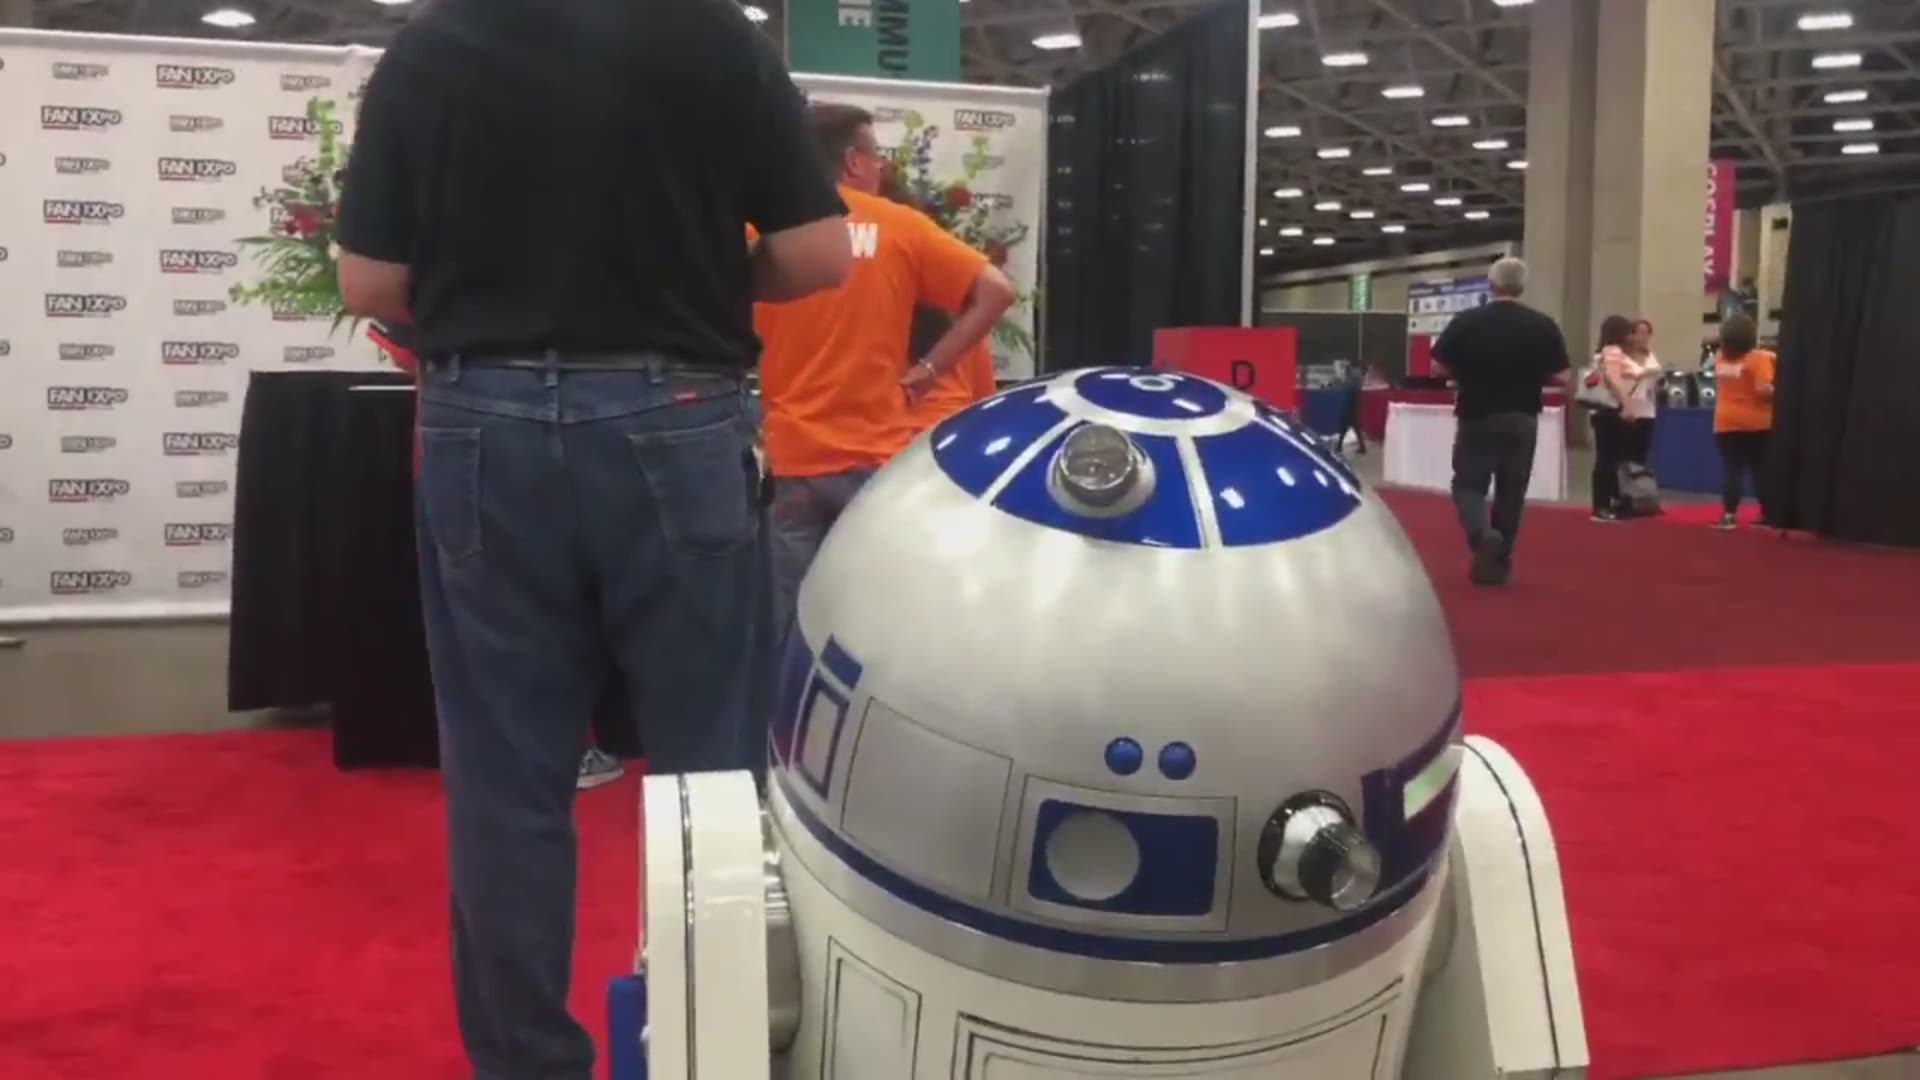 R2-D2 lined up with Star Wars fans at Fan Expo Dallas to say goodbye to a dear friend, Peter Mayhew, aka Chewbacca.